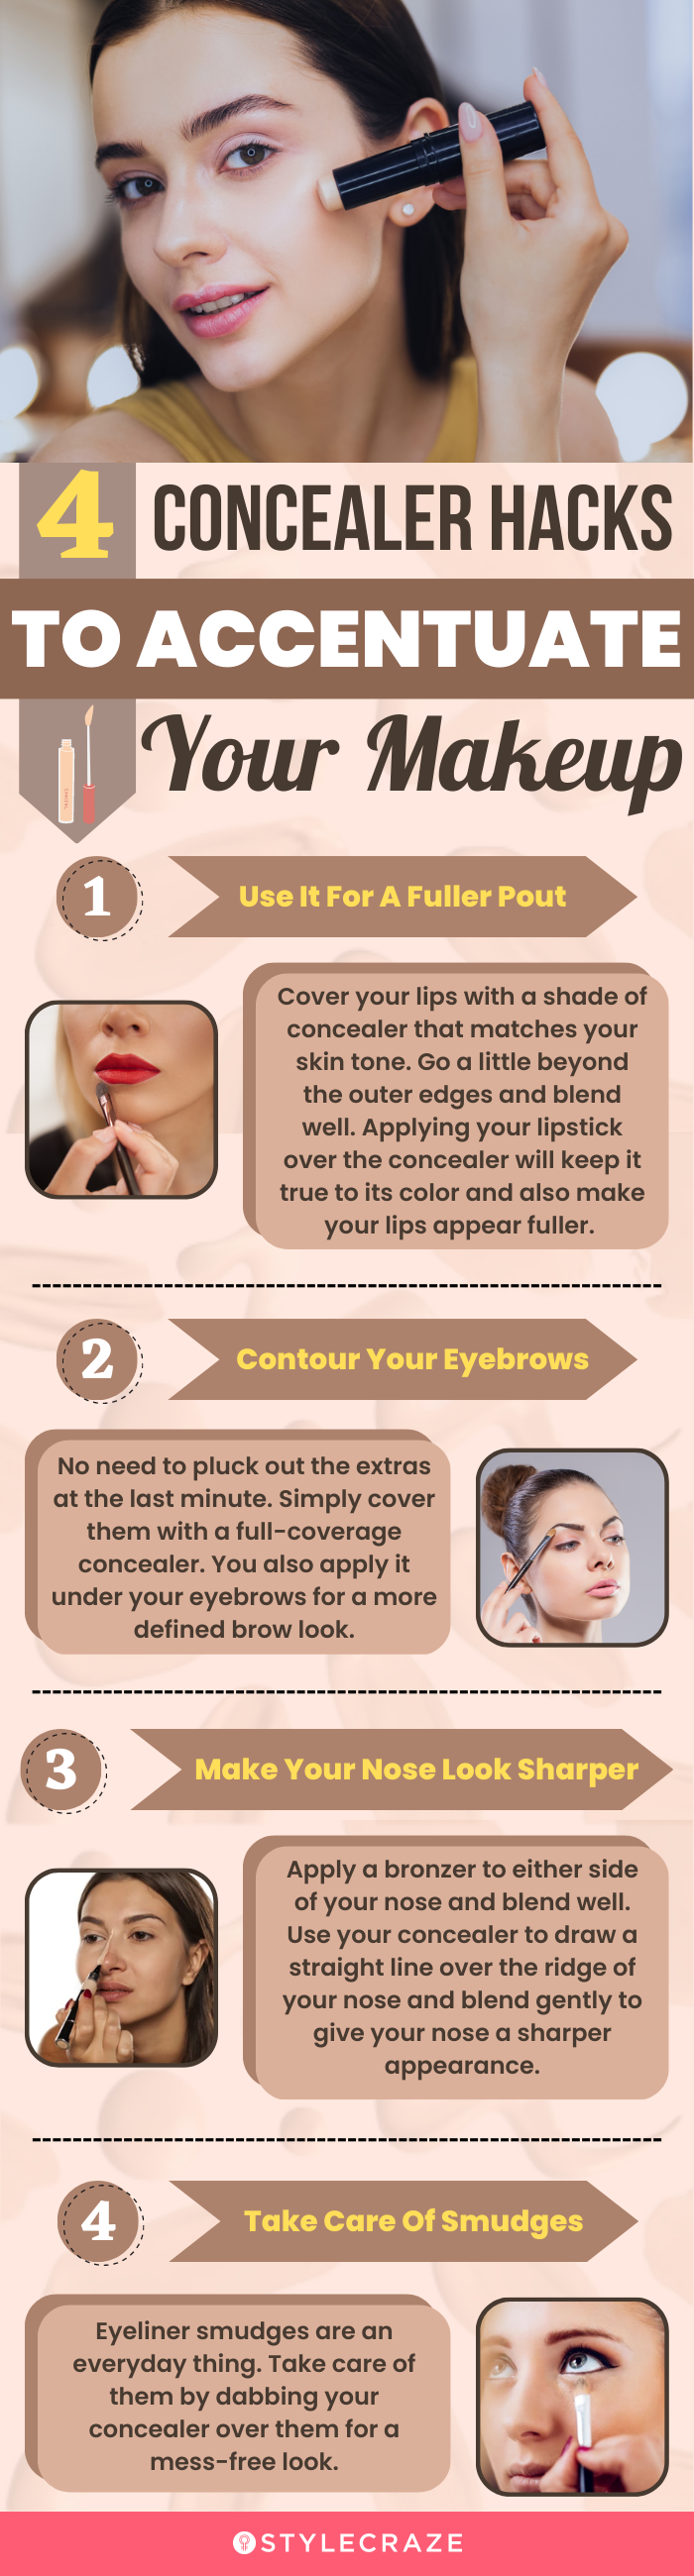 4 Concealer Hacks To Accentuate Your Makeup (infographic)